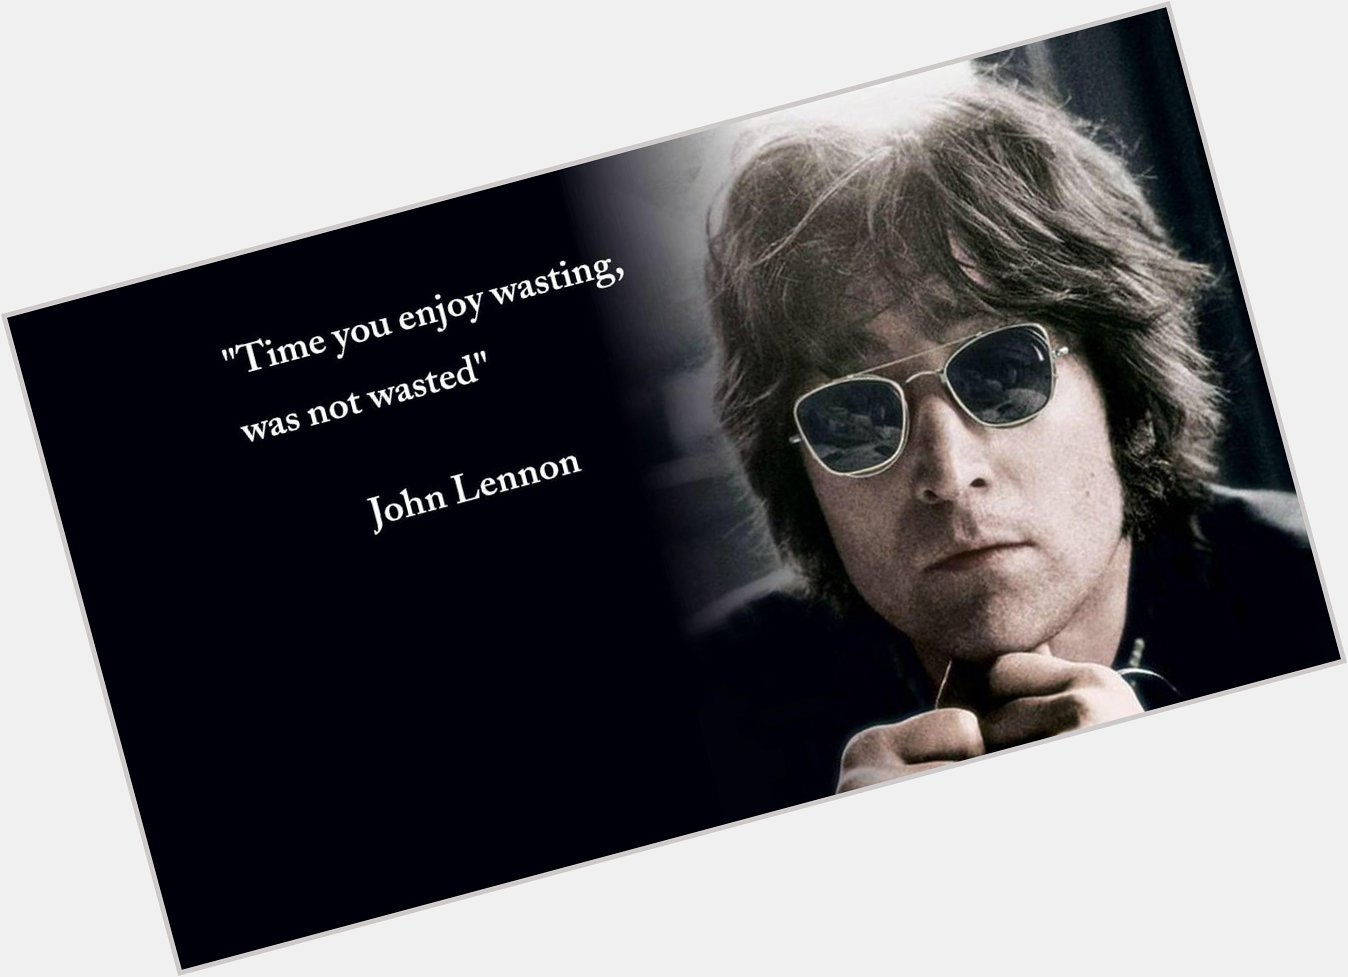 Happy Birthday John Lennon
75 Today

A word from John for a great weekend 